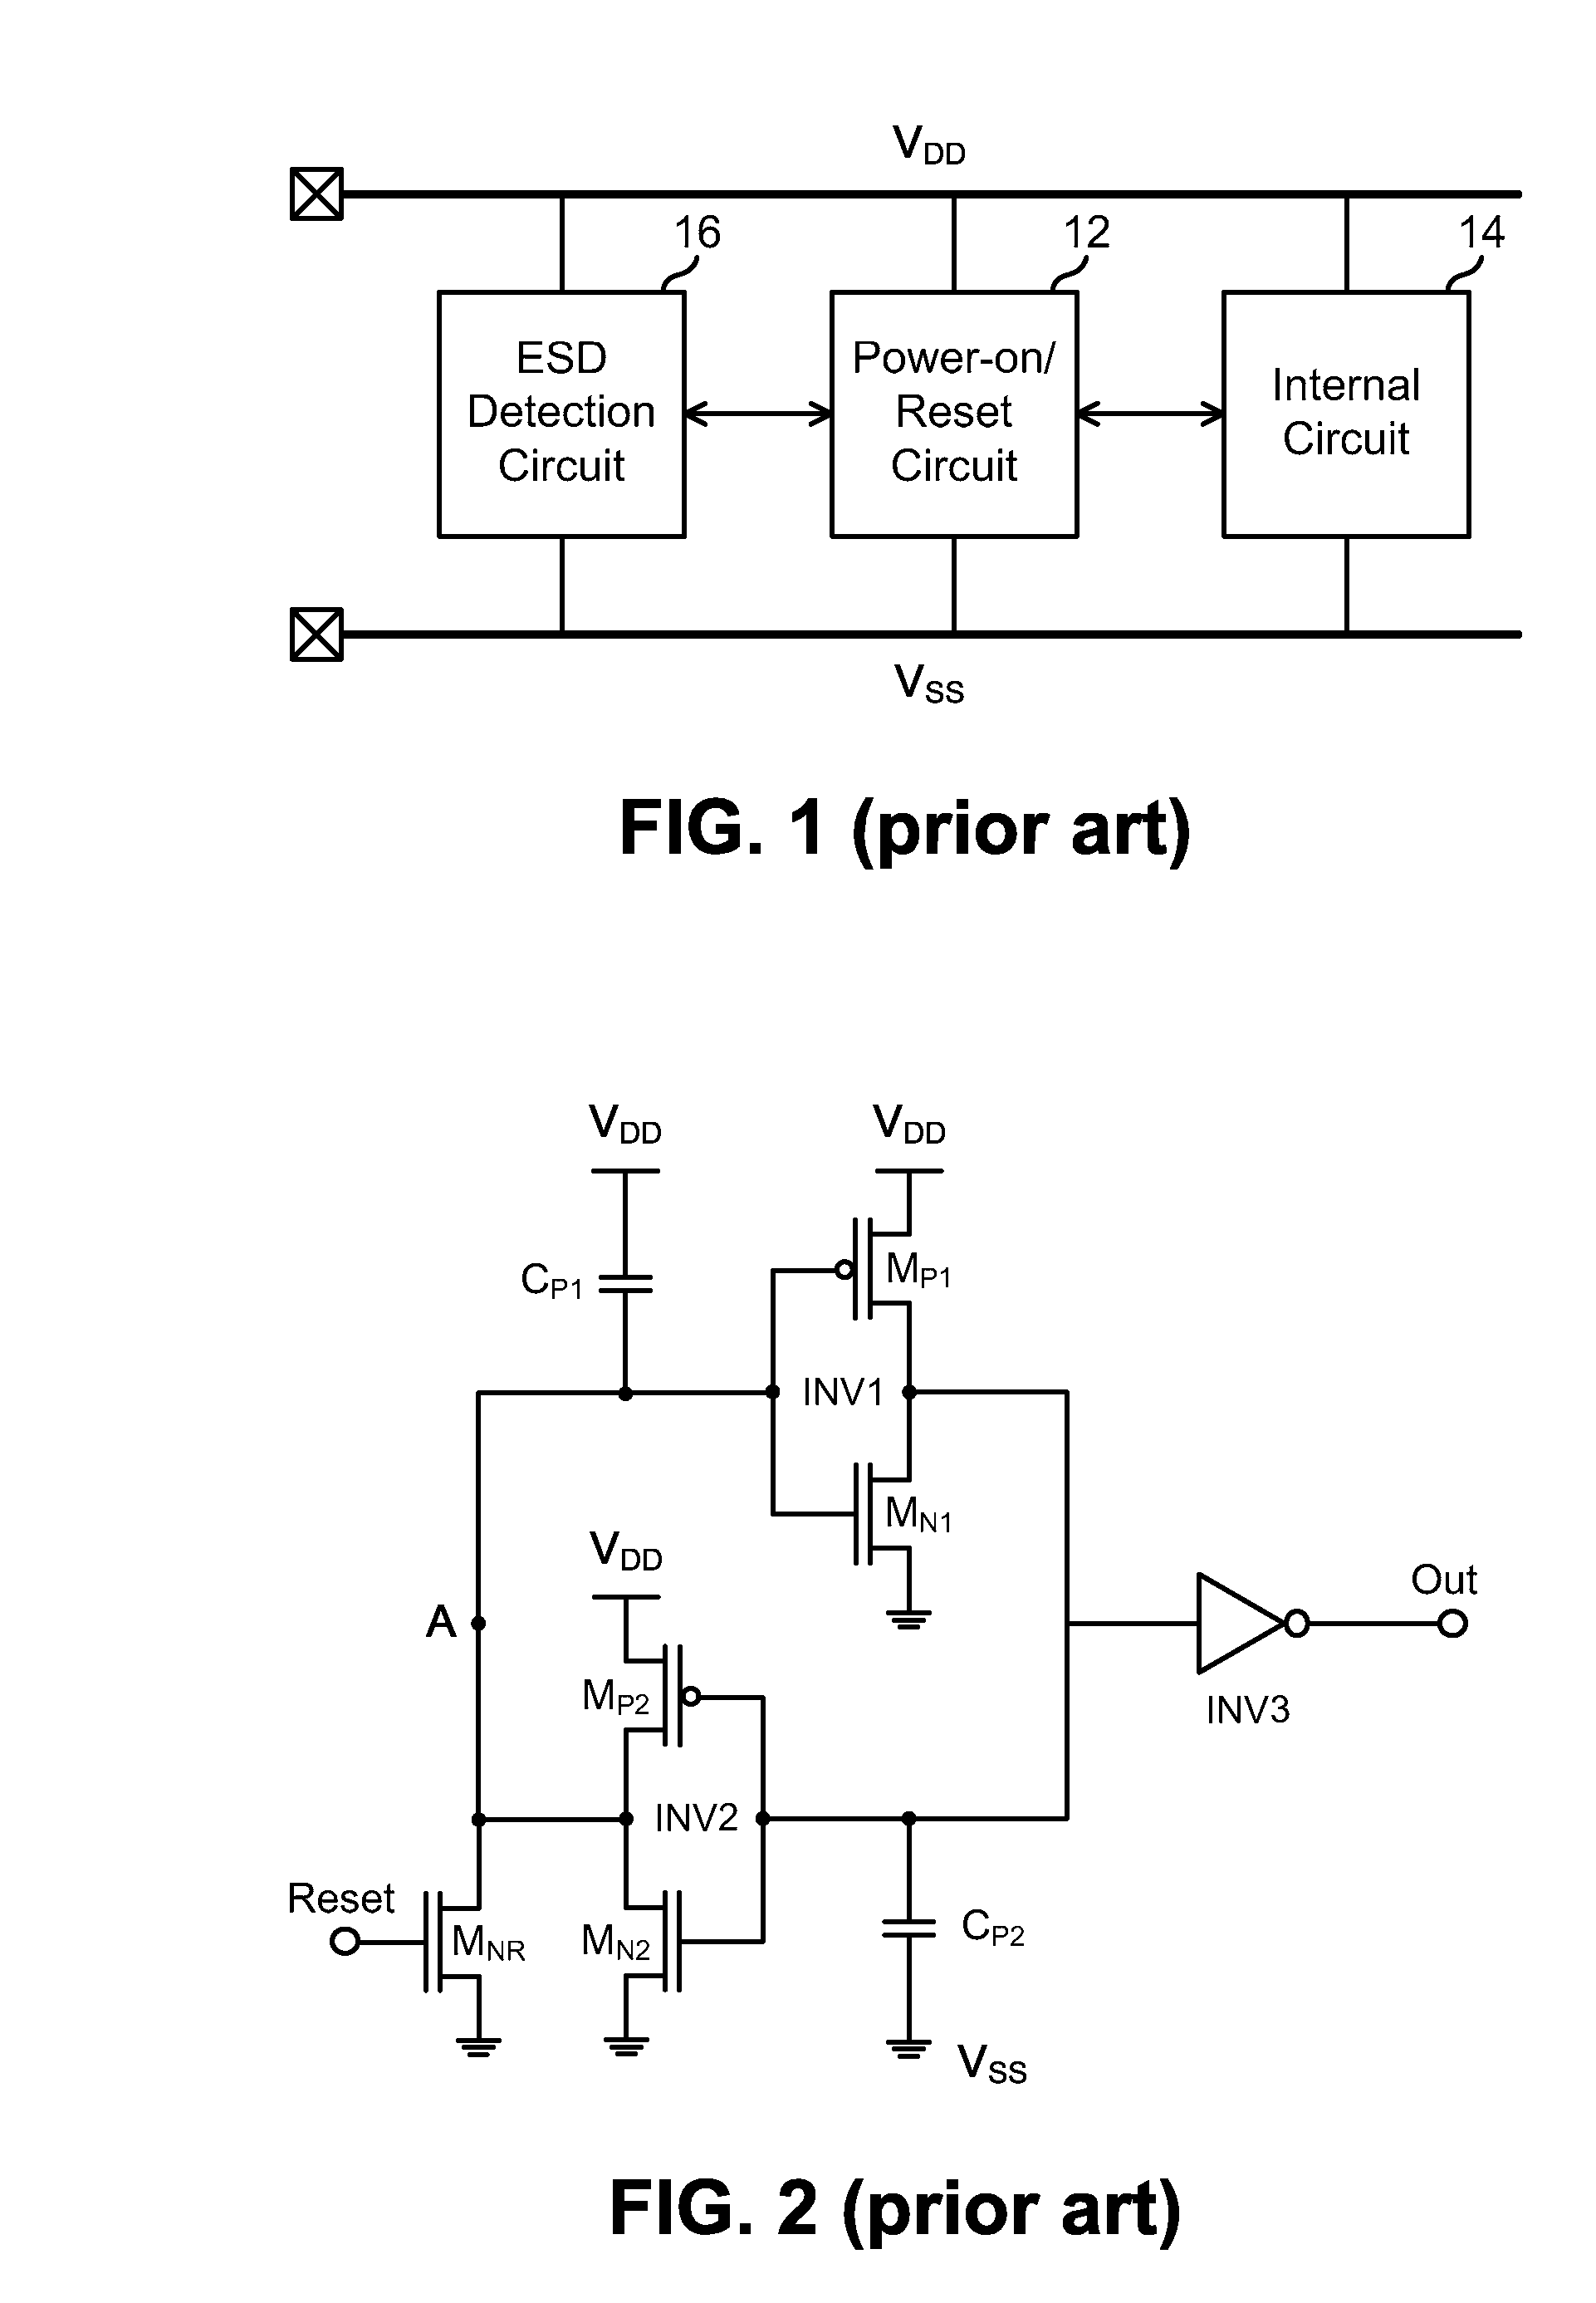 System-level ESD detection circuit